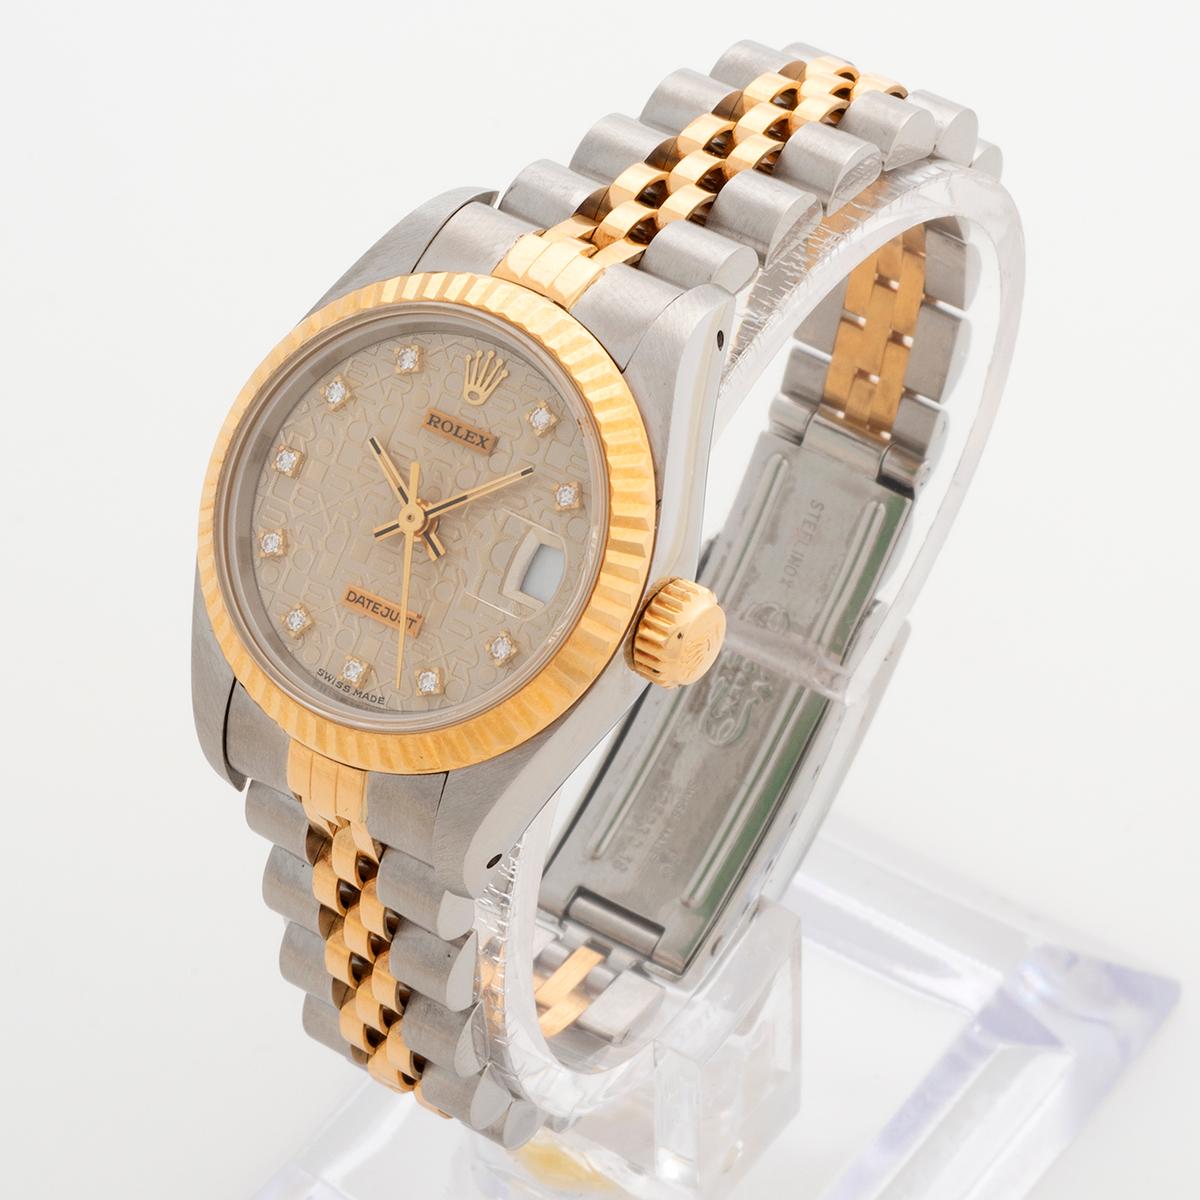 Women's or Men's Rolex Lady Datejust Ref 69173, Anniversary Dial/Diamond Indices, Box & Papers